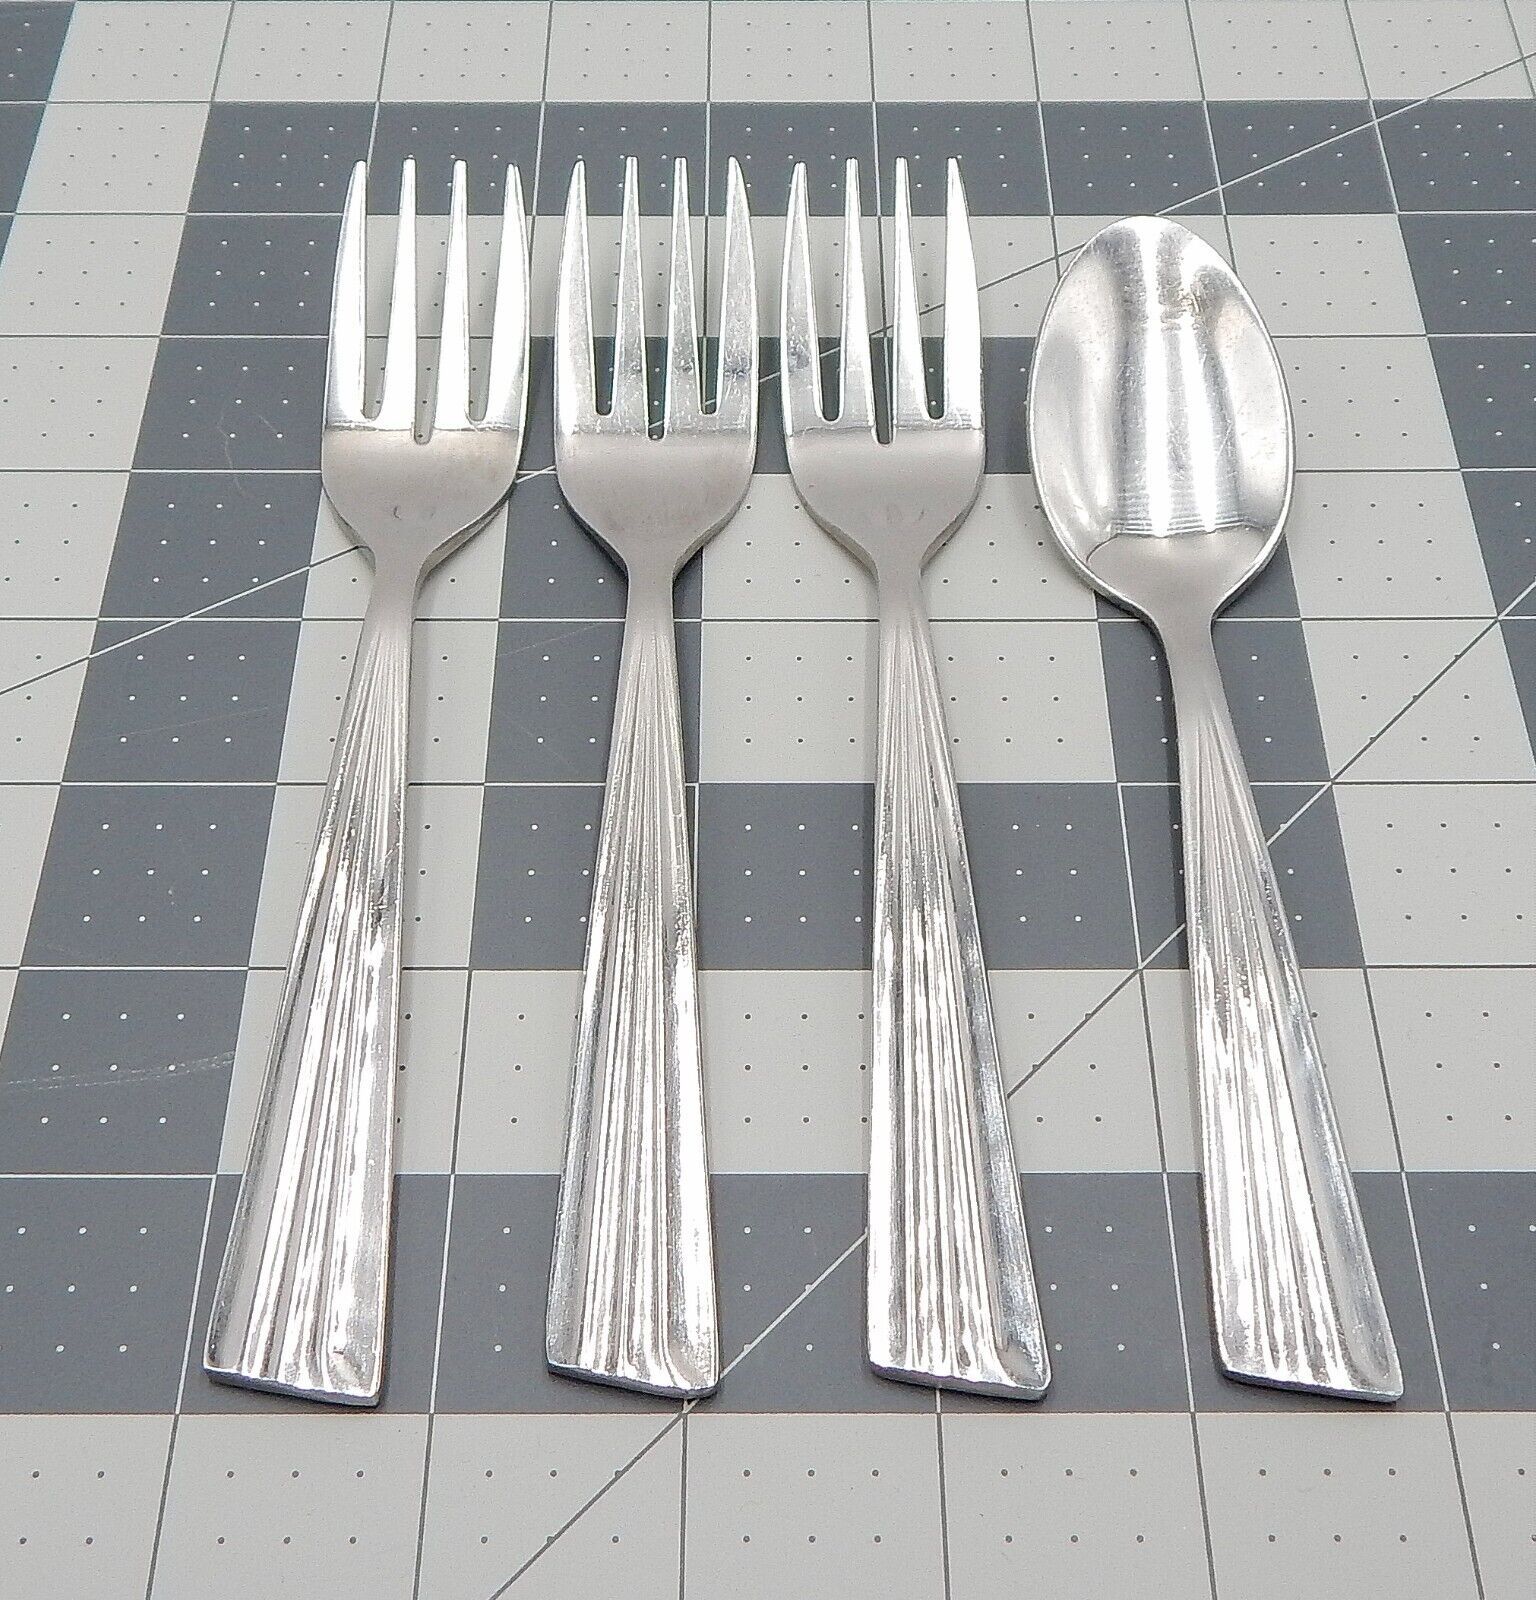 Primary image for Pacific Superior 1-7 Salad Dessert Forks Teaspoon Ribbed Angled Handles Lot of 4